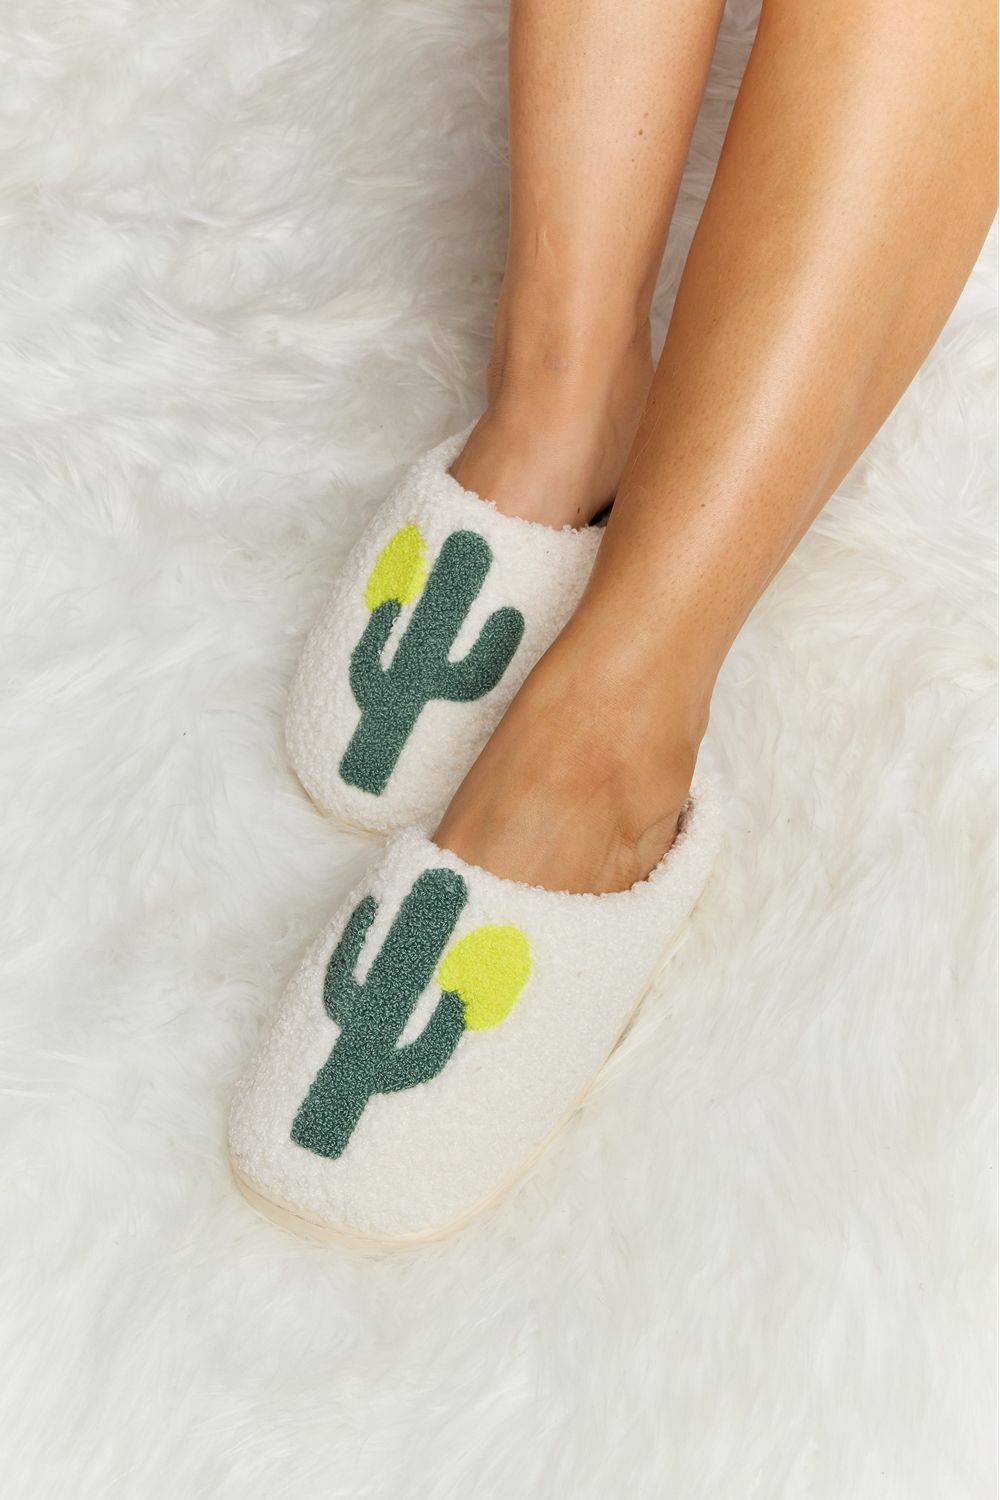 Cactus Plush Slide Slippers in IvorySlippersMelody